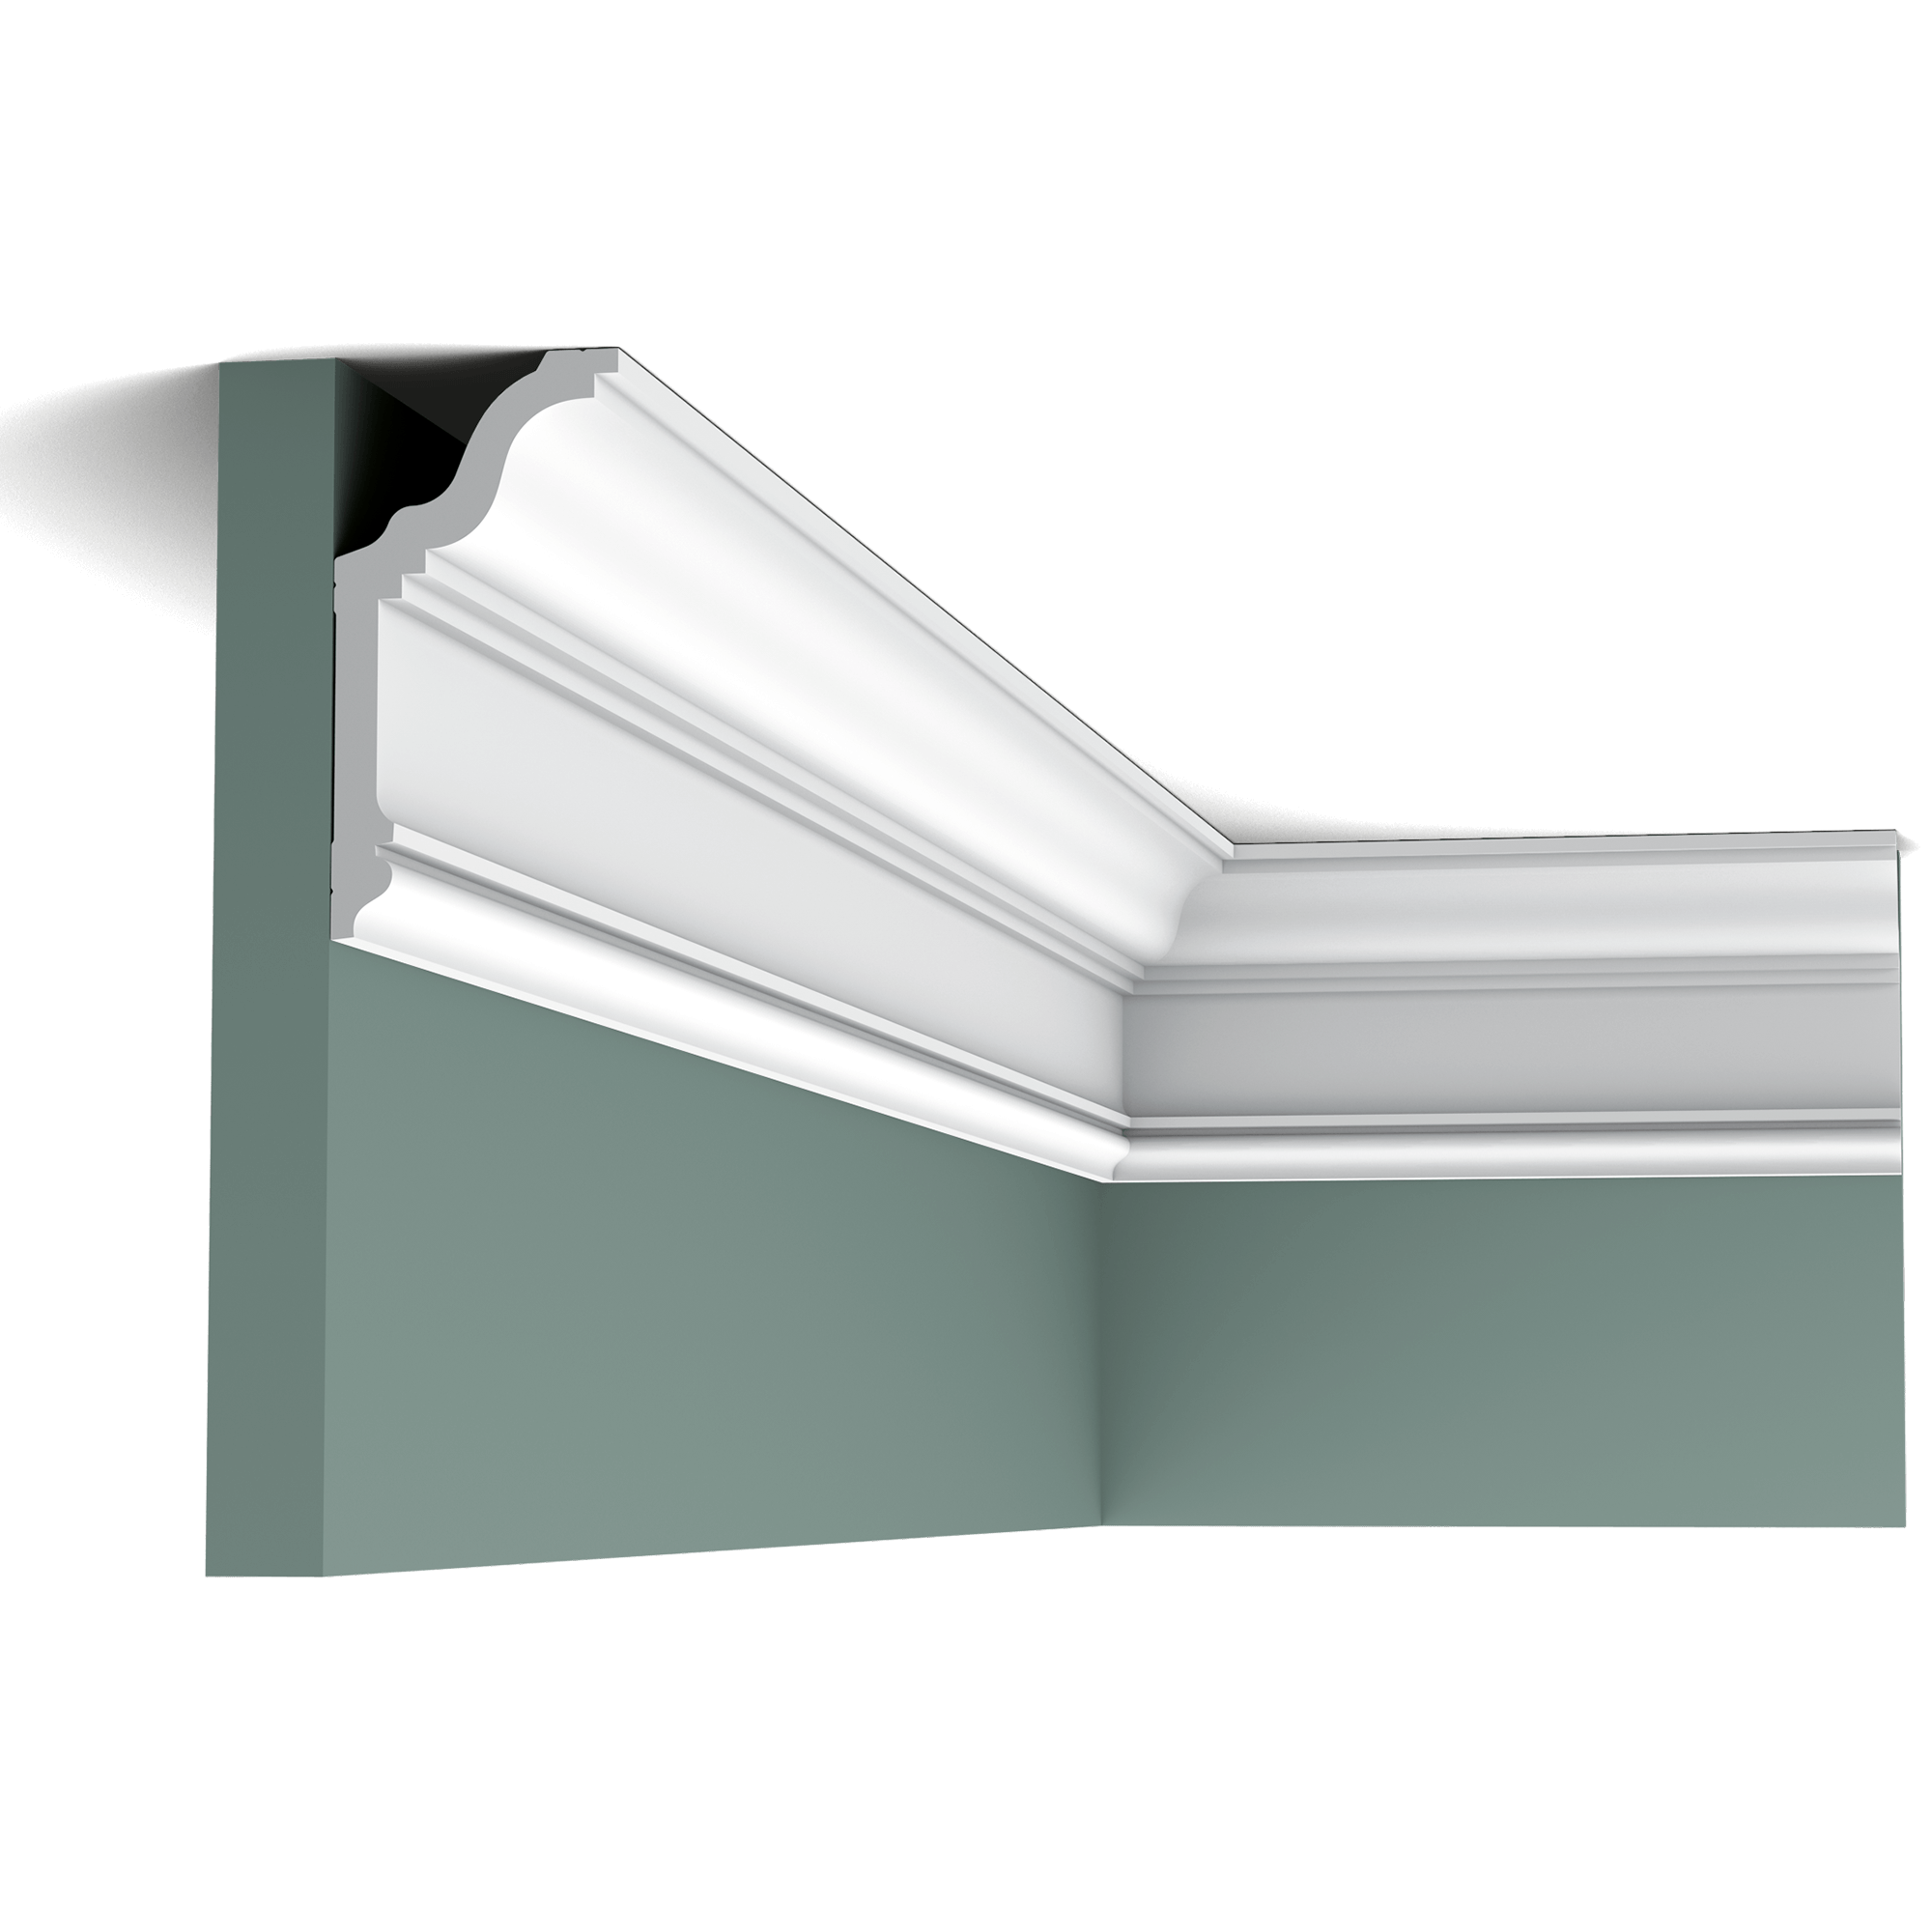 This cornice with cyma recta curvature and large extended base is the perfect finish for any space. The CX192 creates an elegant transition between wall and ceiling to add that little something extra to your interior. Smaller sized variants of this profile are the CX141 and CX176.